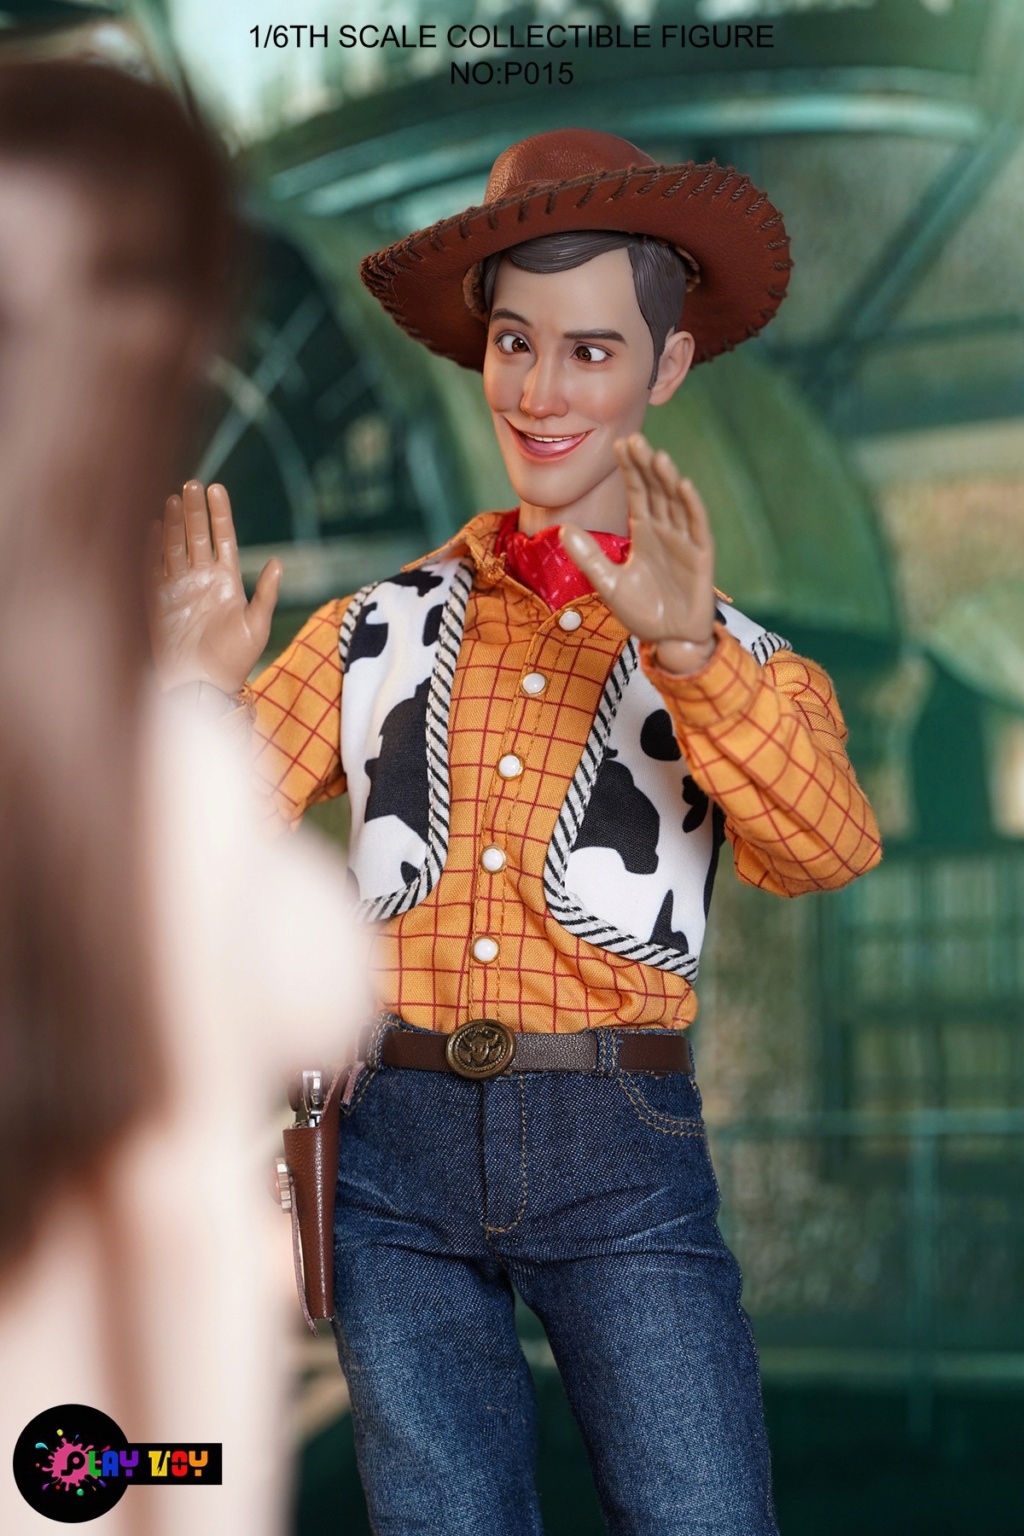 NEW PRODUCT: Play Toy: 1/6 Happy Cowboy Action Figure (NO:P015) 16145910